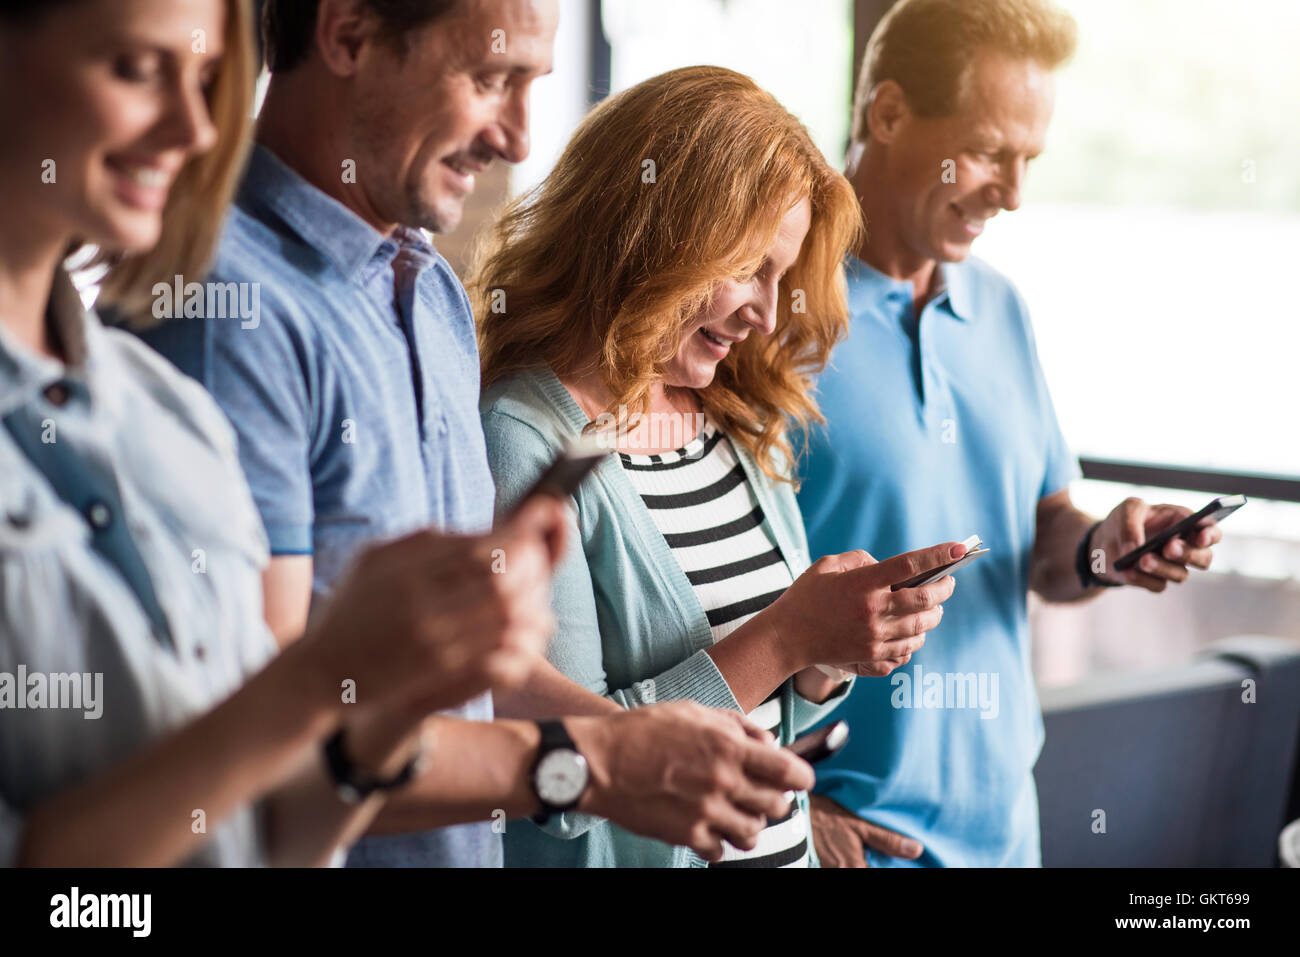 Busy people using smart phones Stock Photo